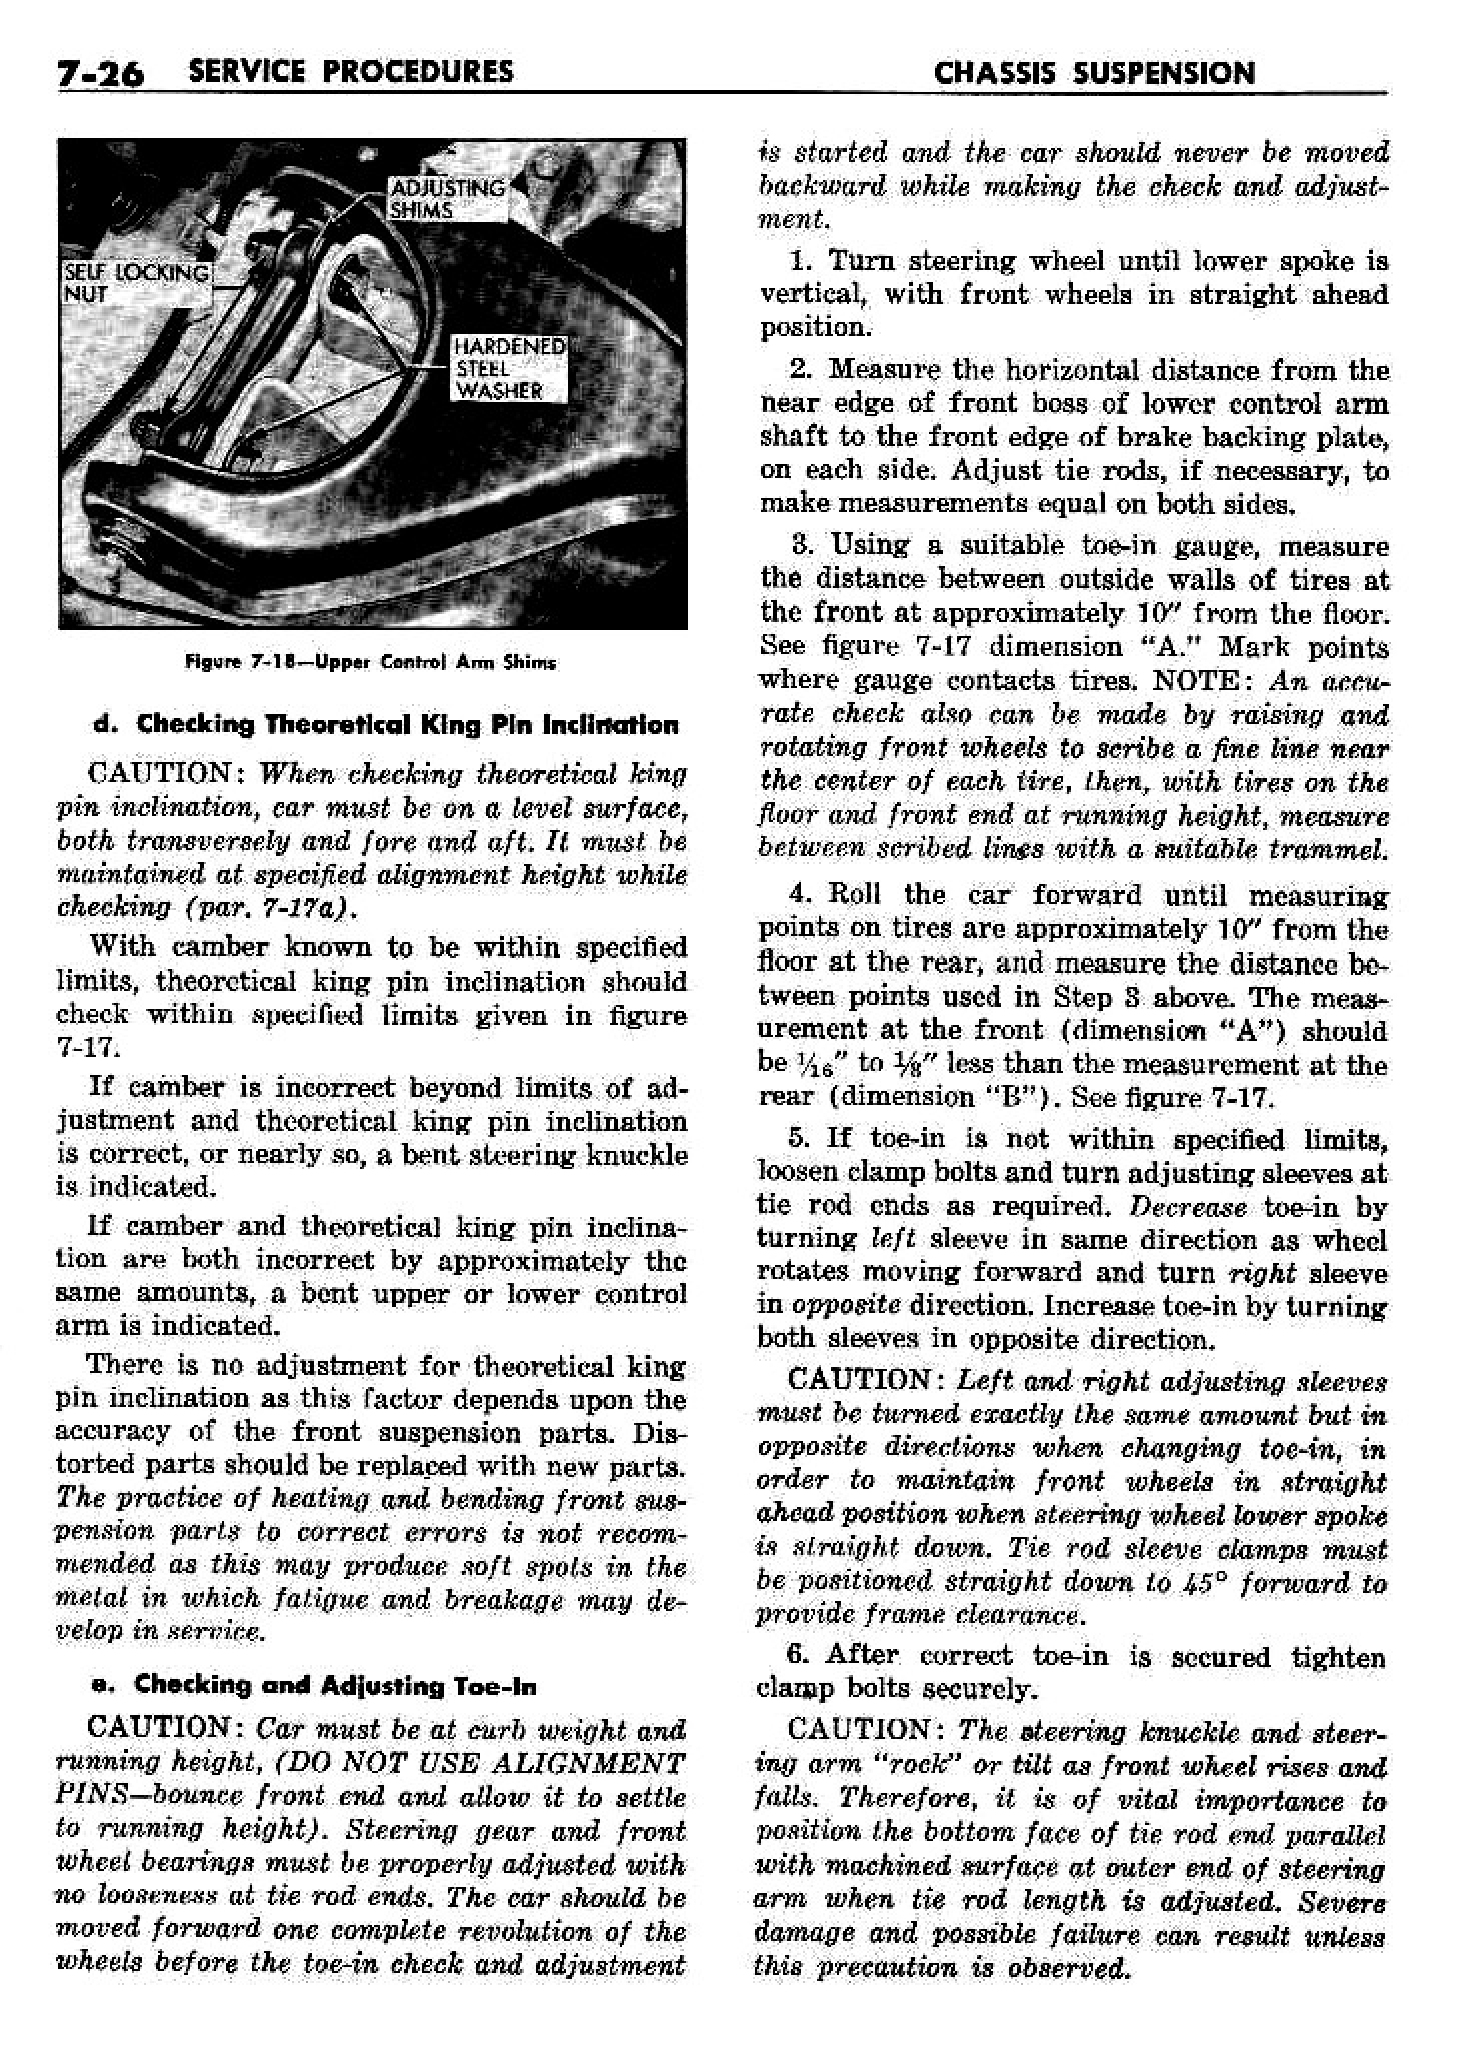 n_08 1958 Buick Shop Manual - Chassis Suspension_26.jpg